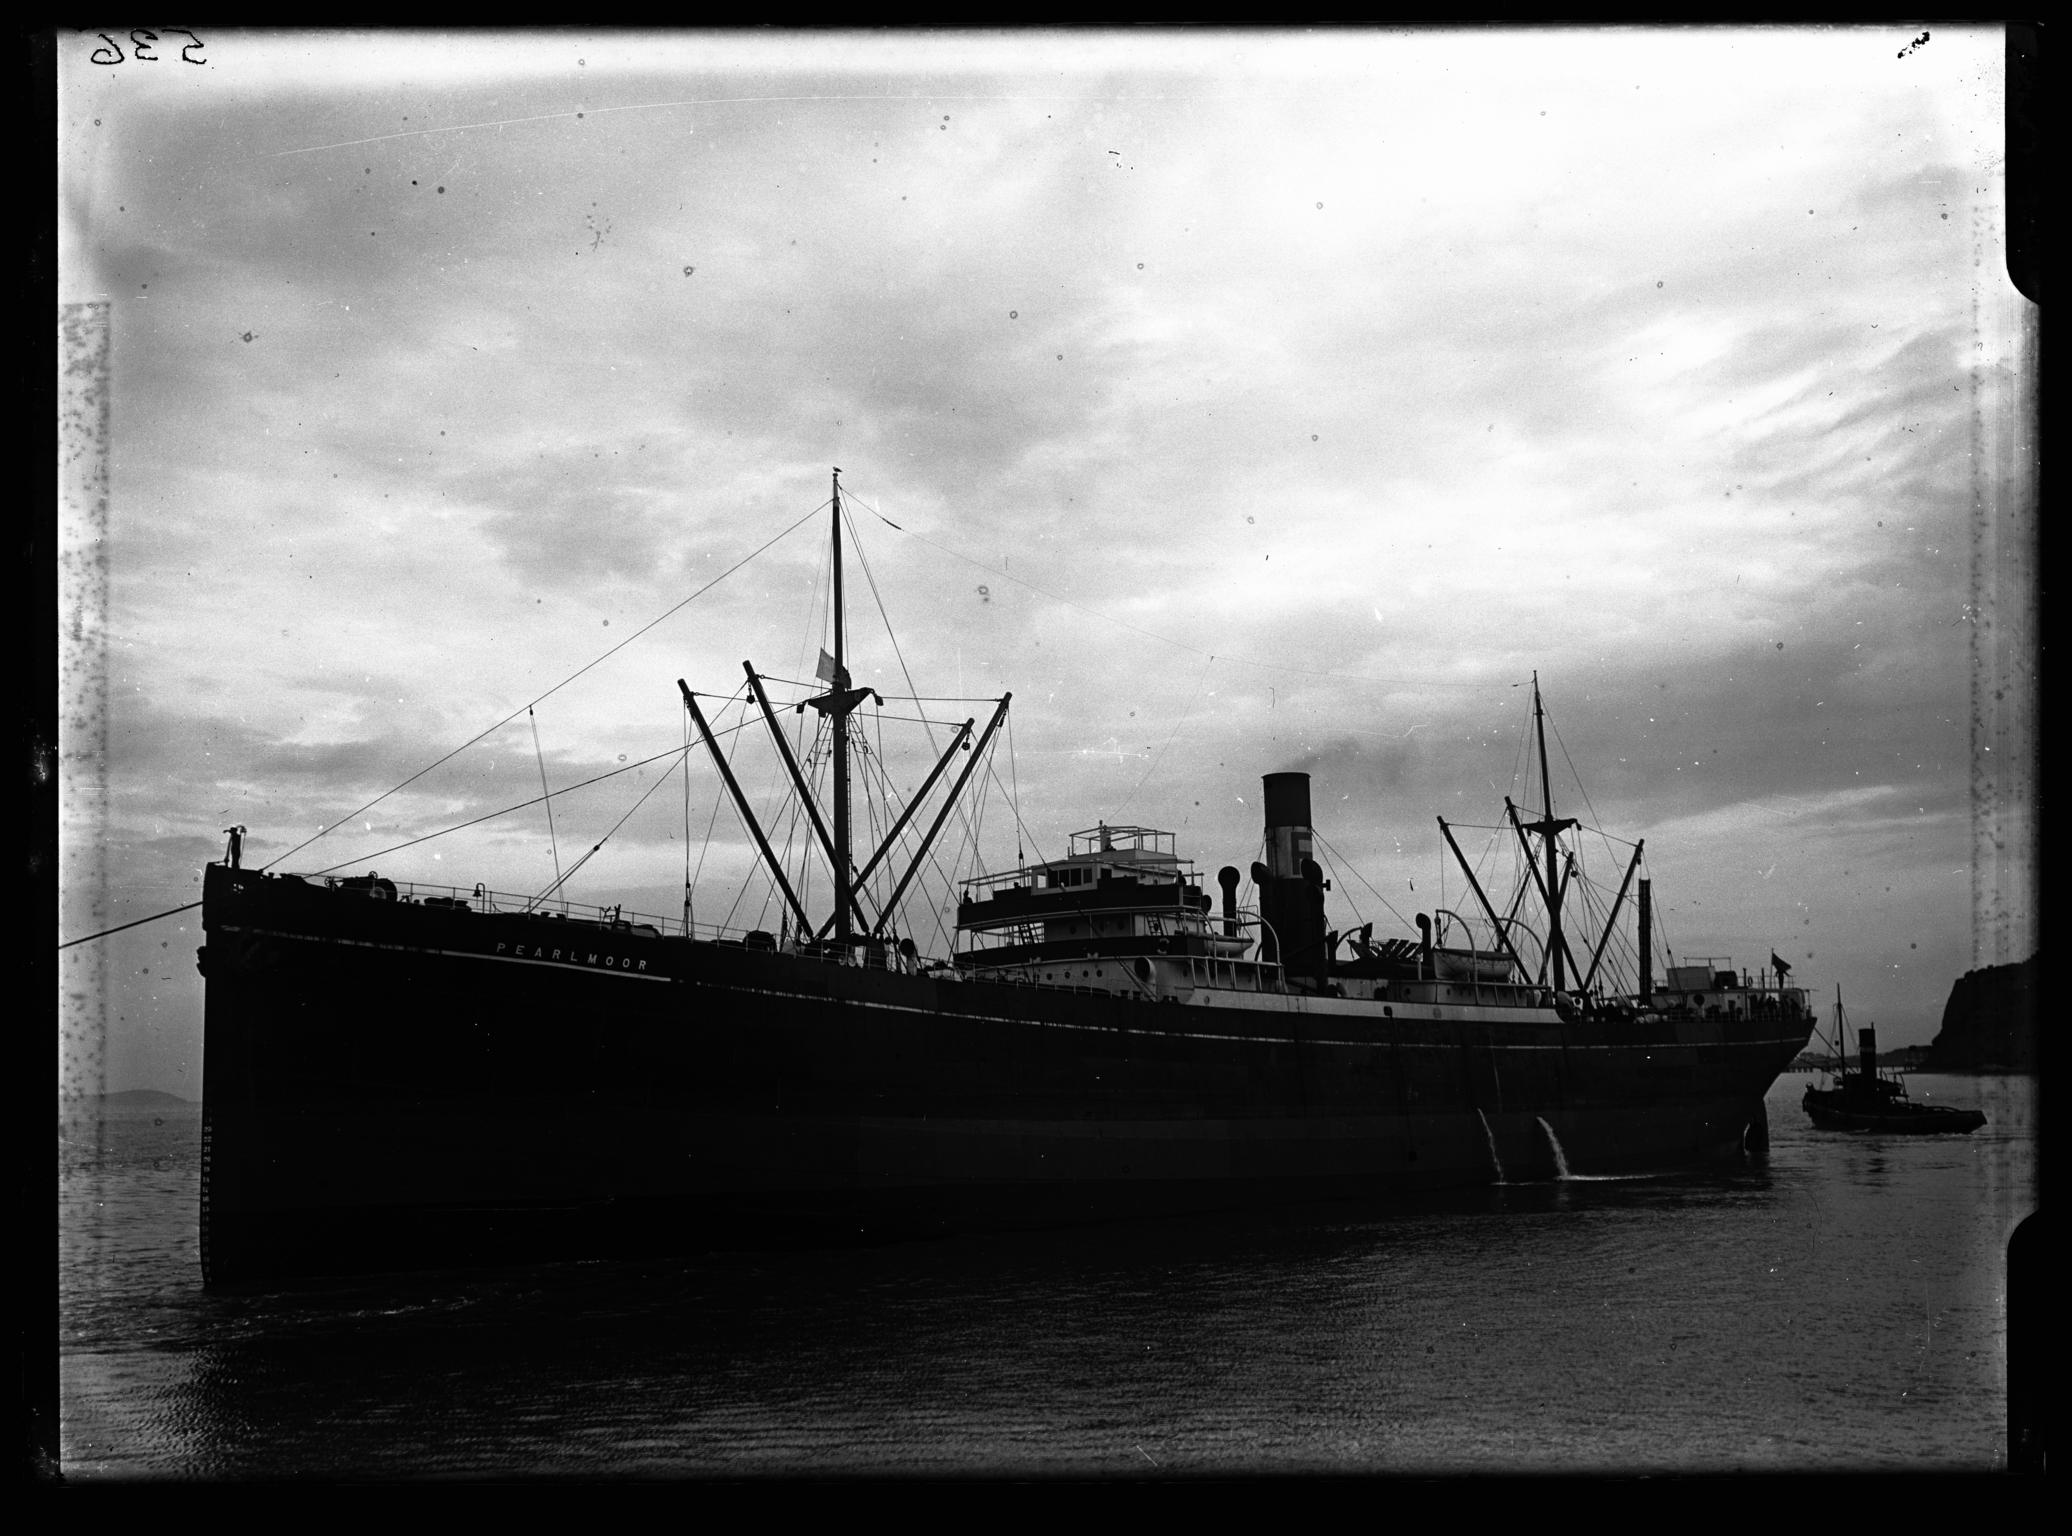 S.S. PEARLMOOR, glass negative